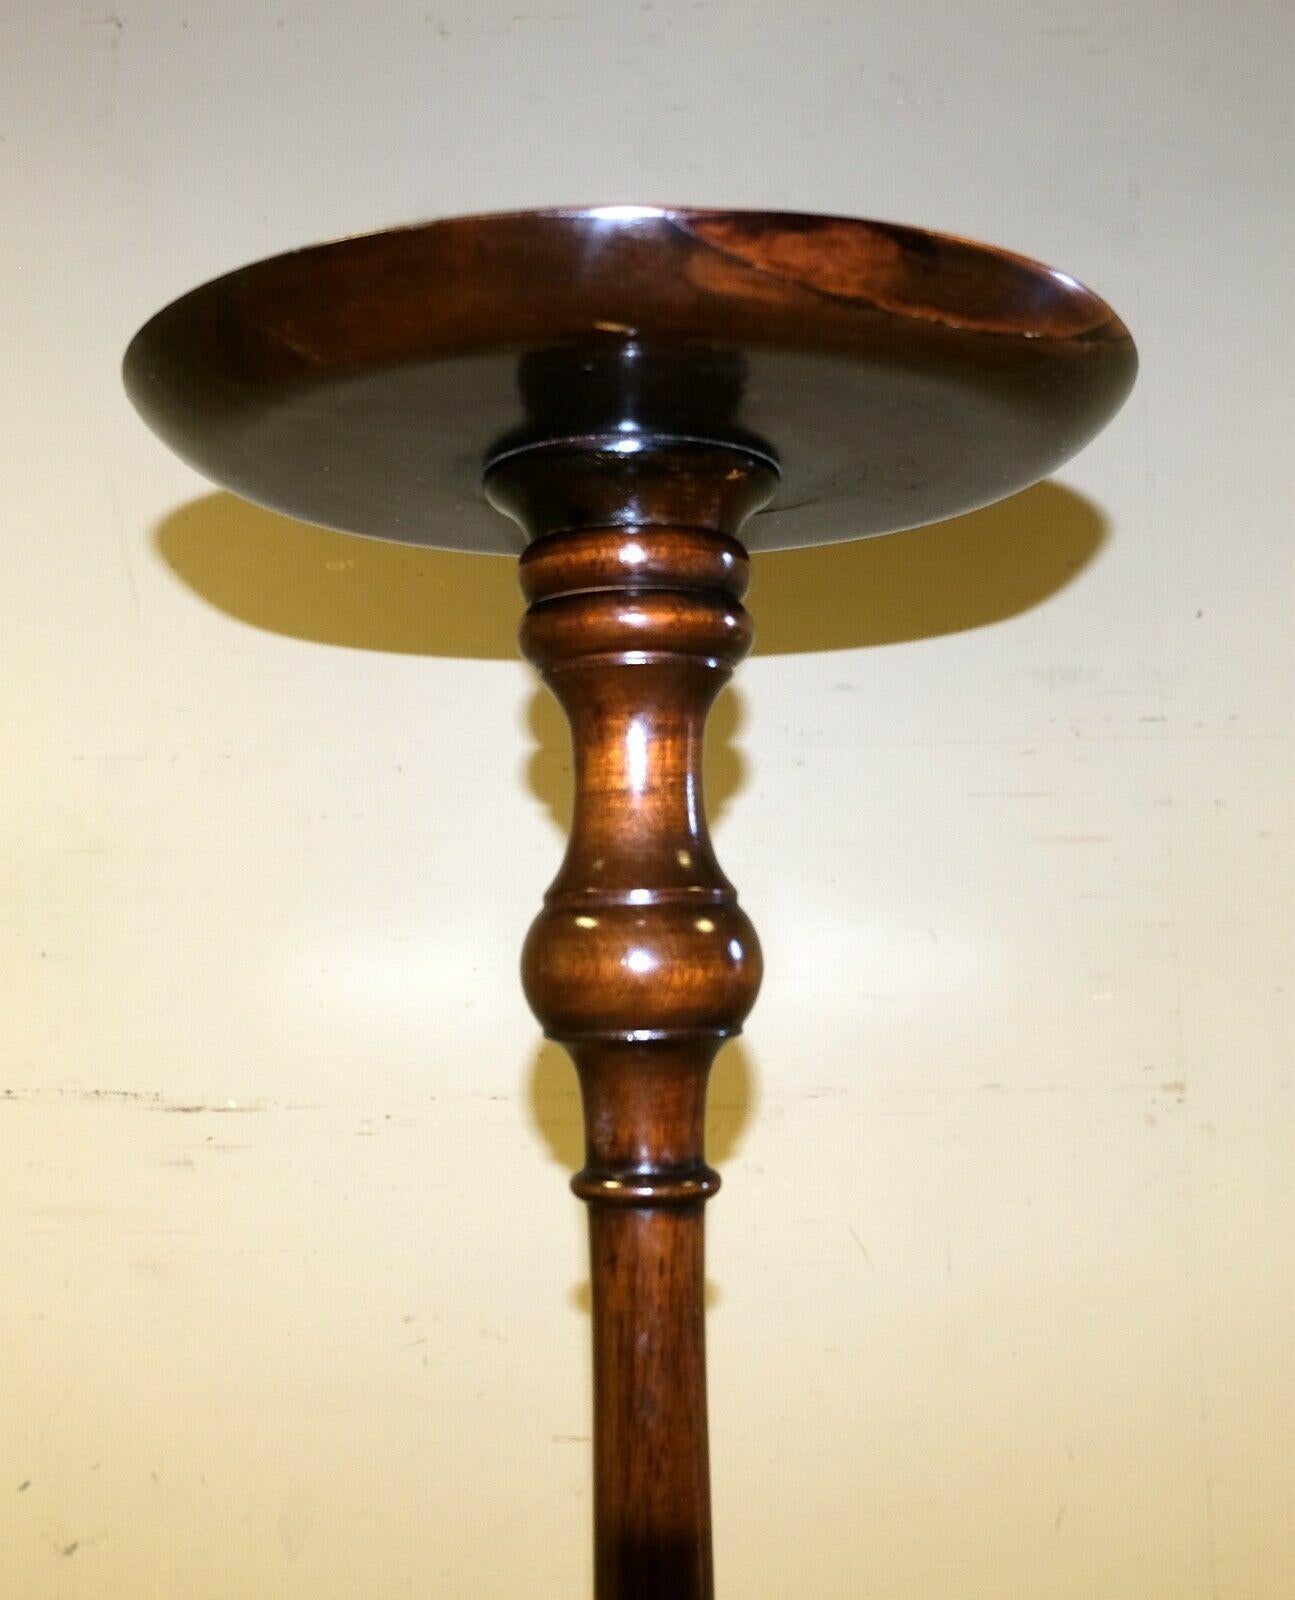 Hand-Crafted Elegant Hardwood Antique Tripod Torchere Jardiniere Plant Stand Table For Sale